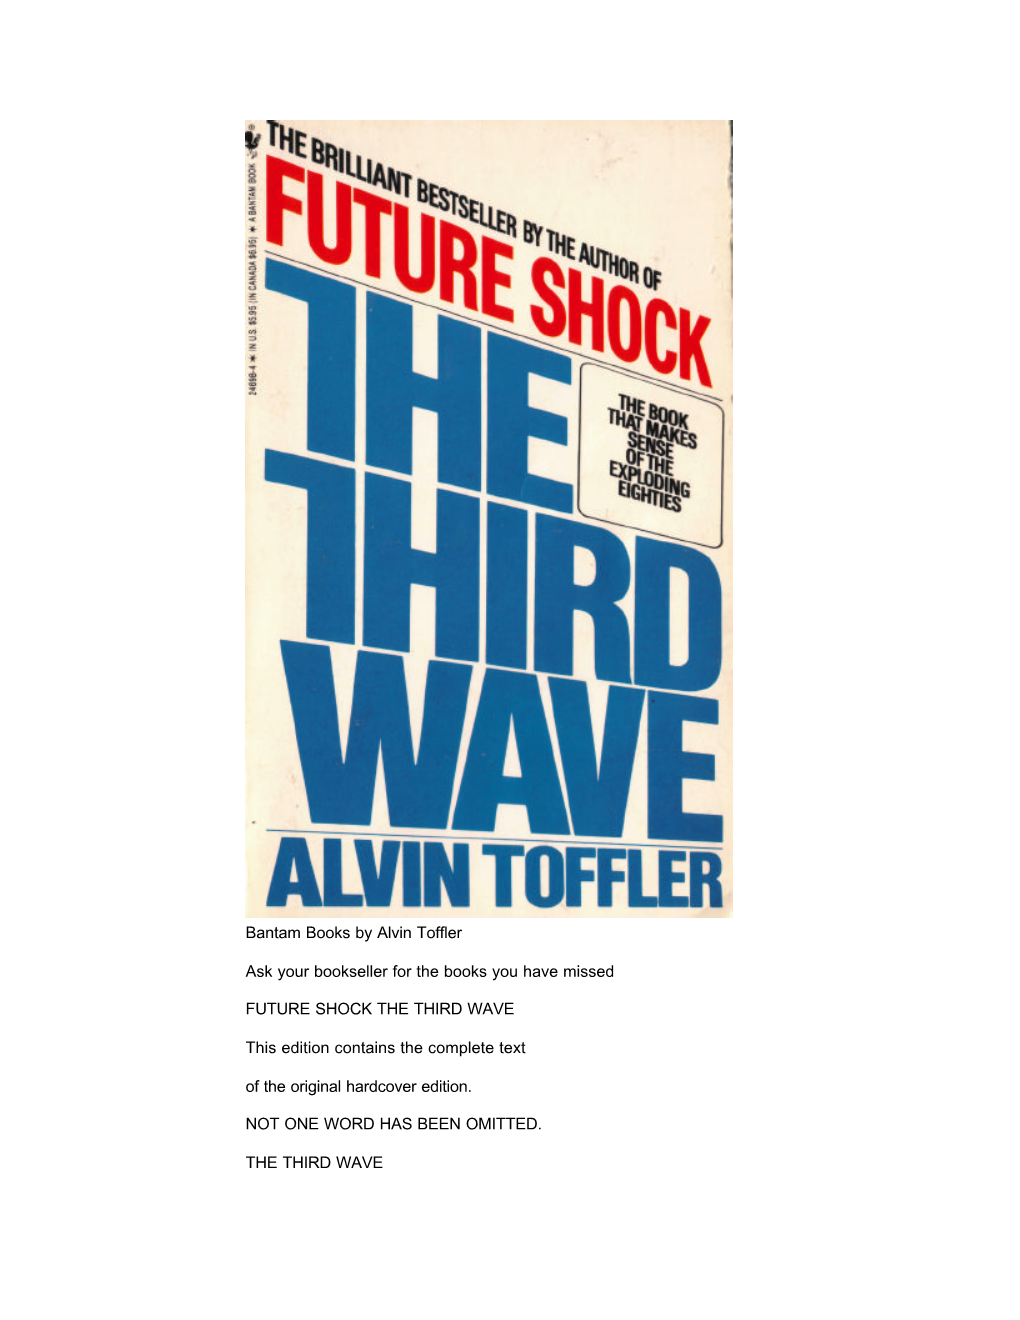 3Rdwave by Alvin Toffler